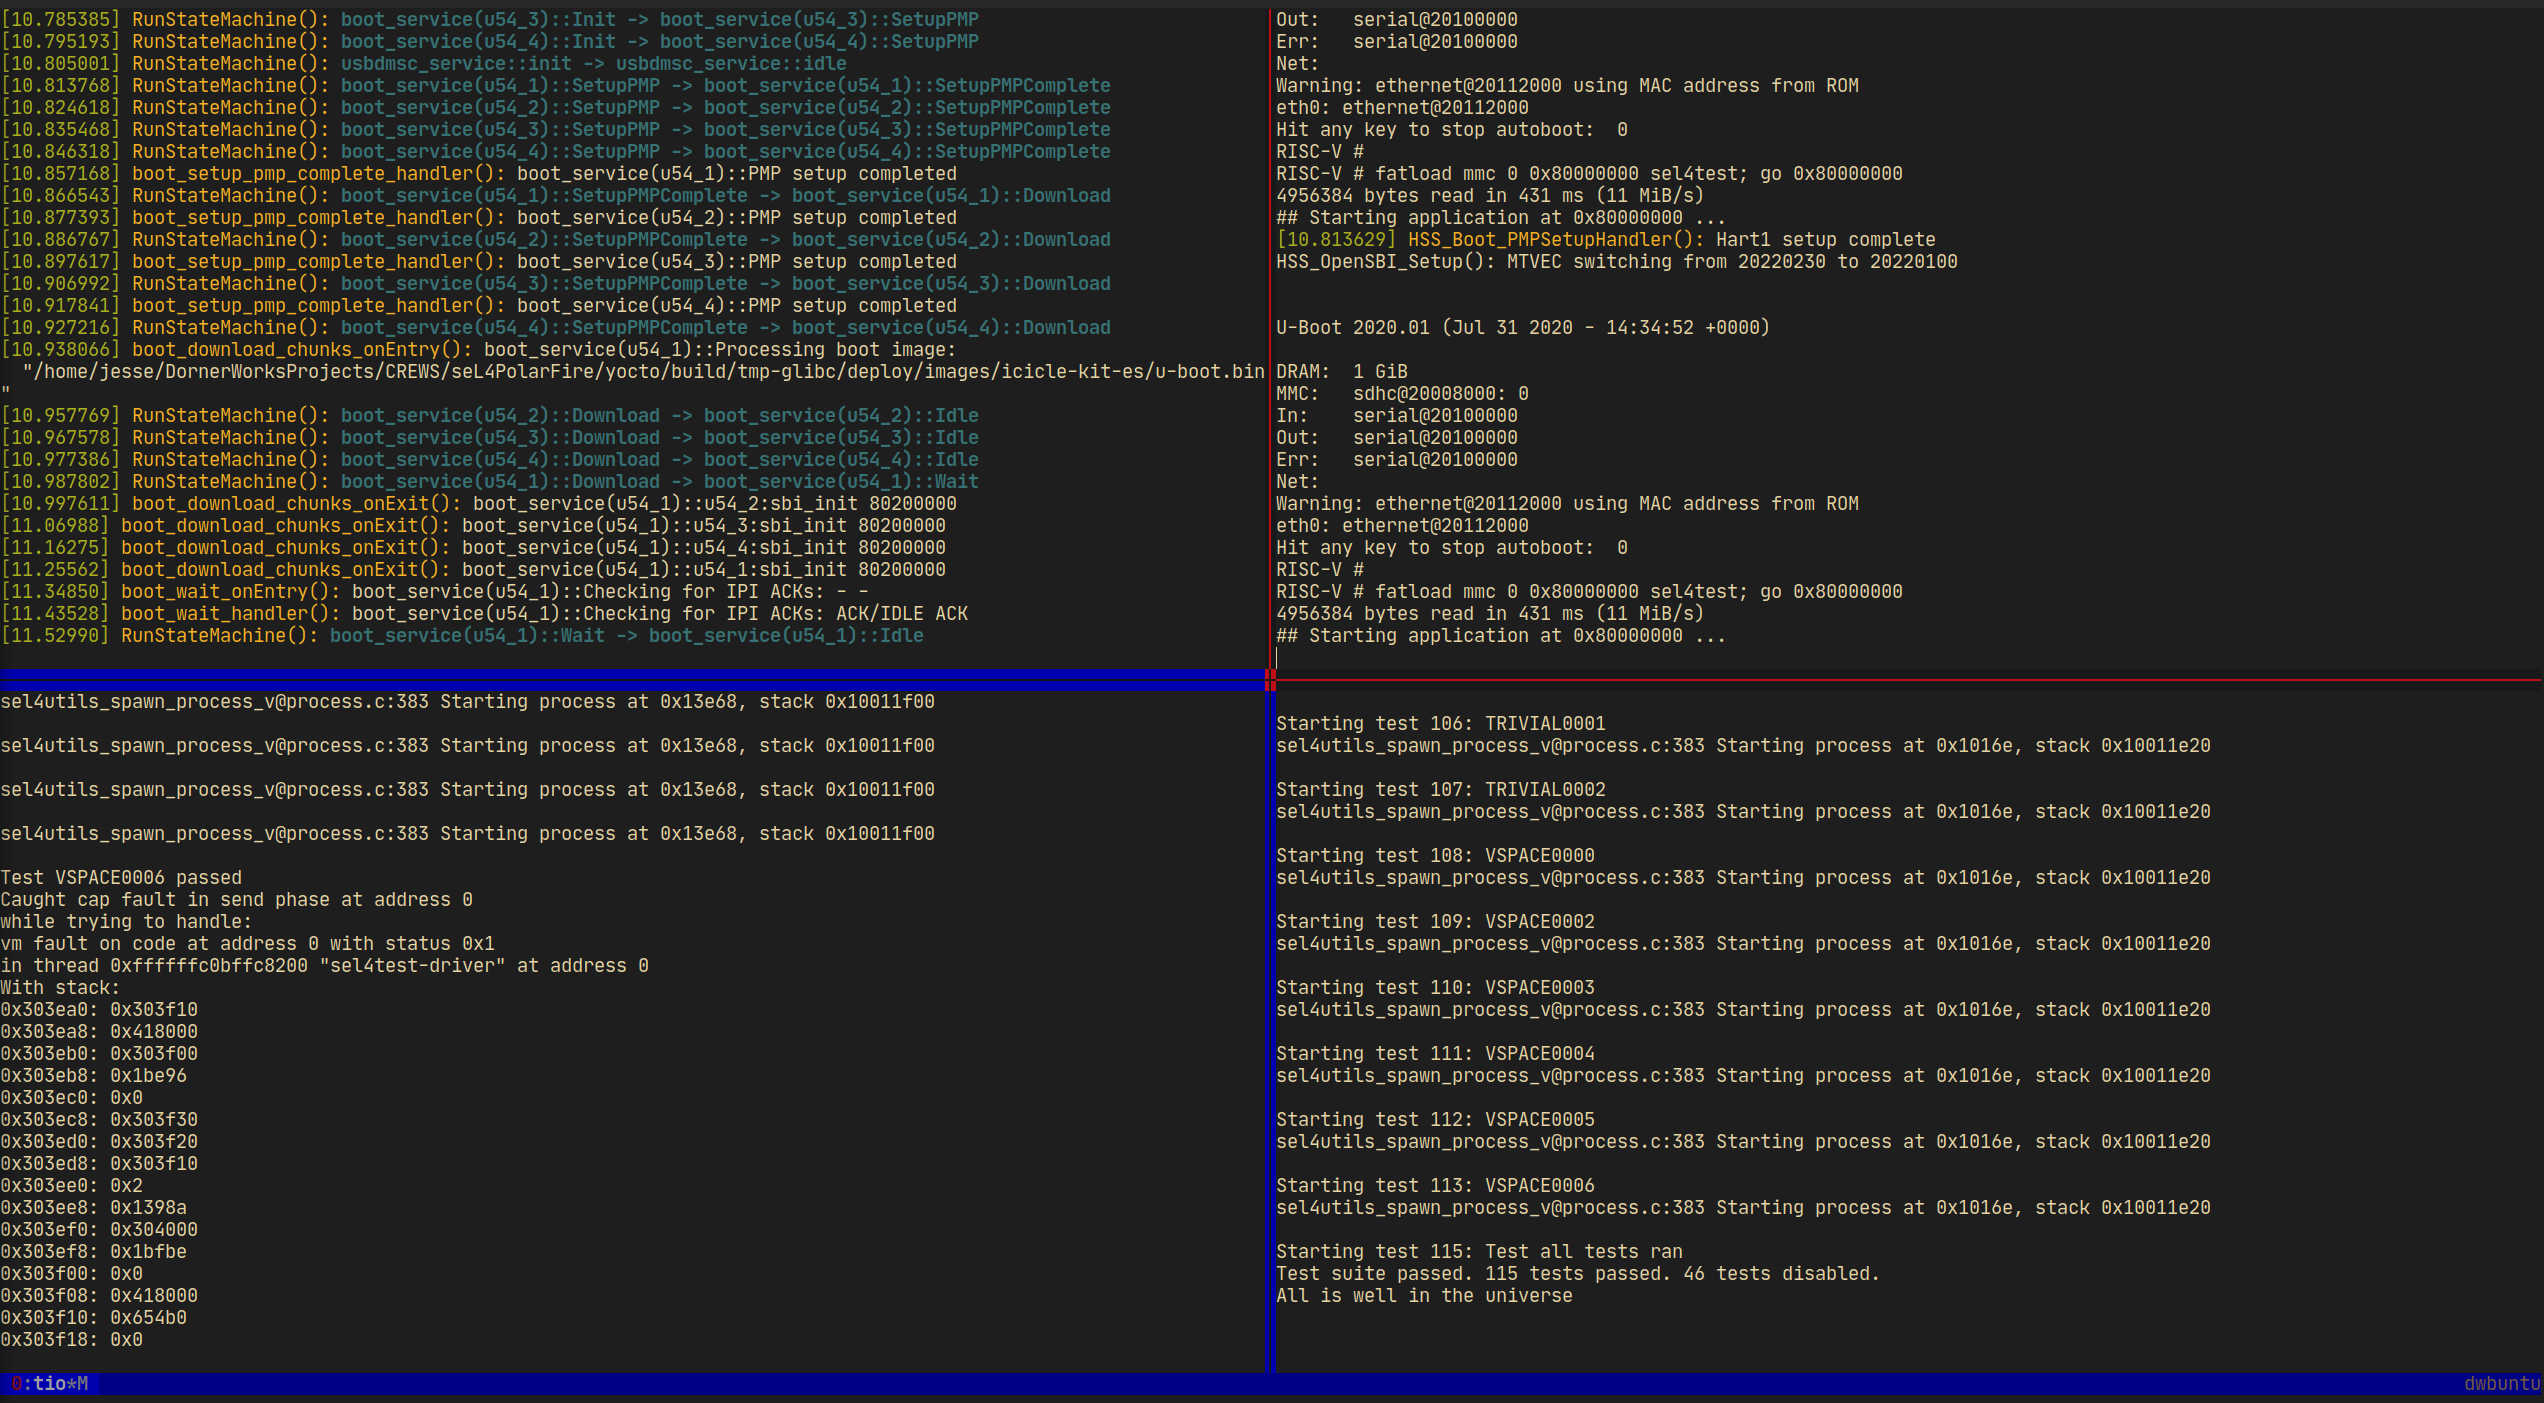 You should see debug statements printing on the kernel terminal and test output in the lower right.